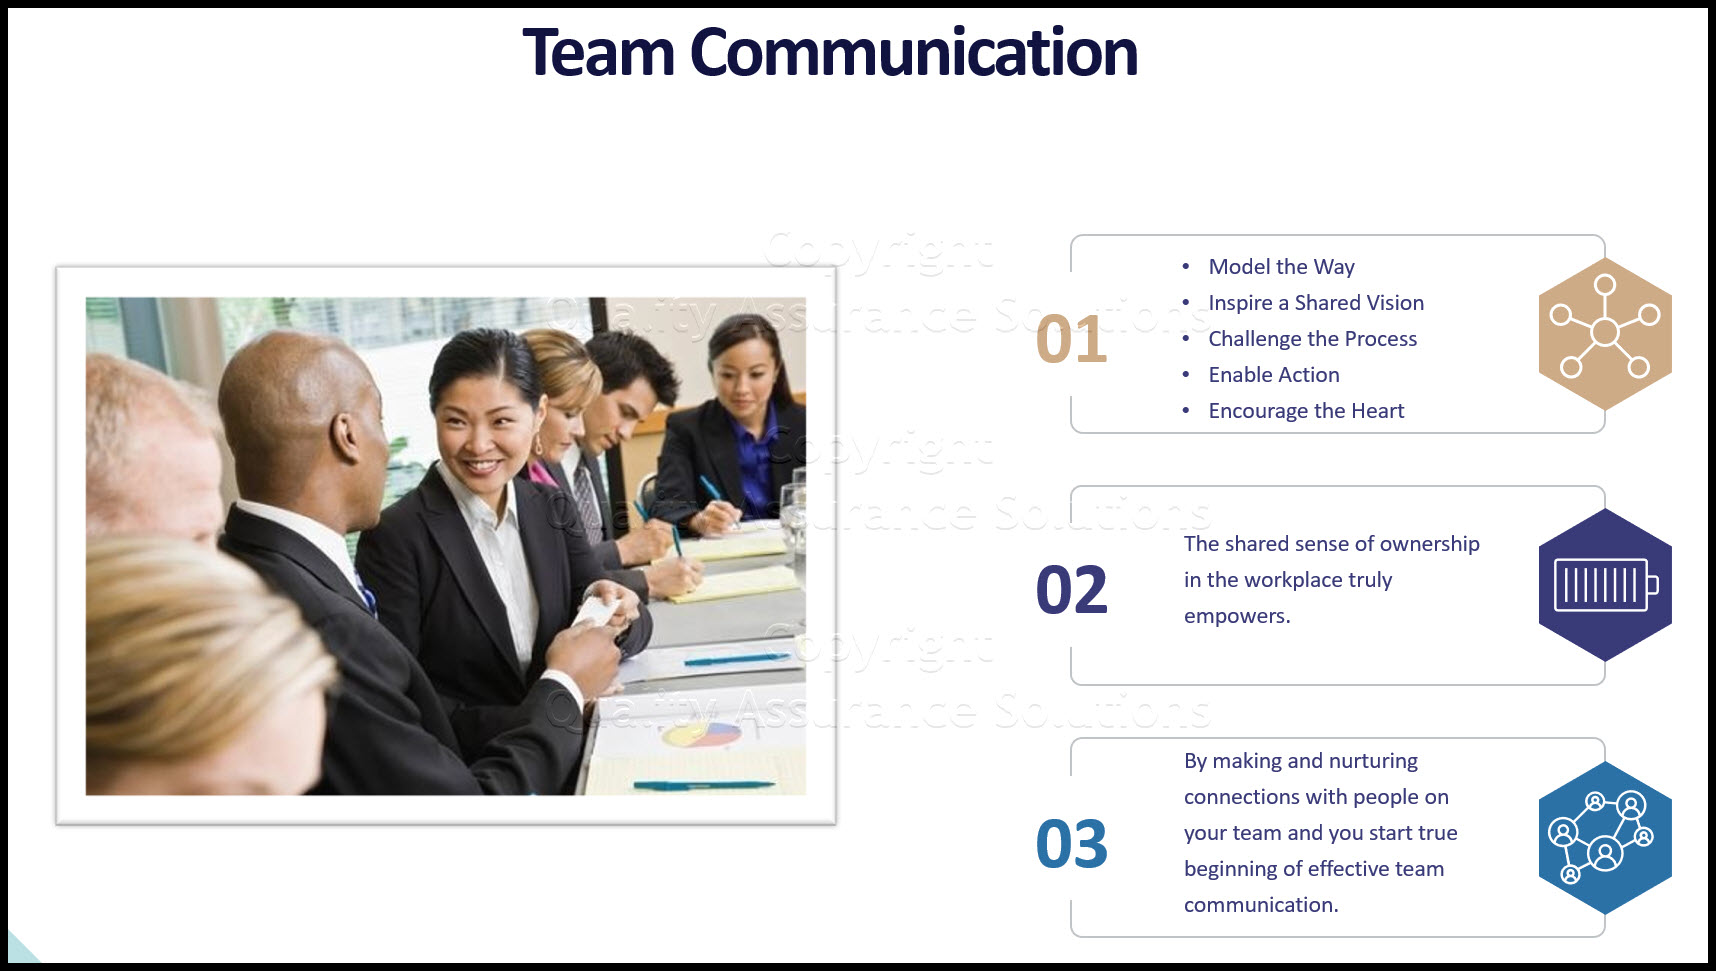 Describes effective team communication skills that helps create alignment and ownership.